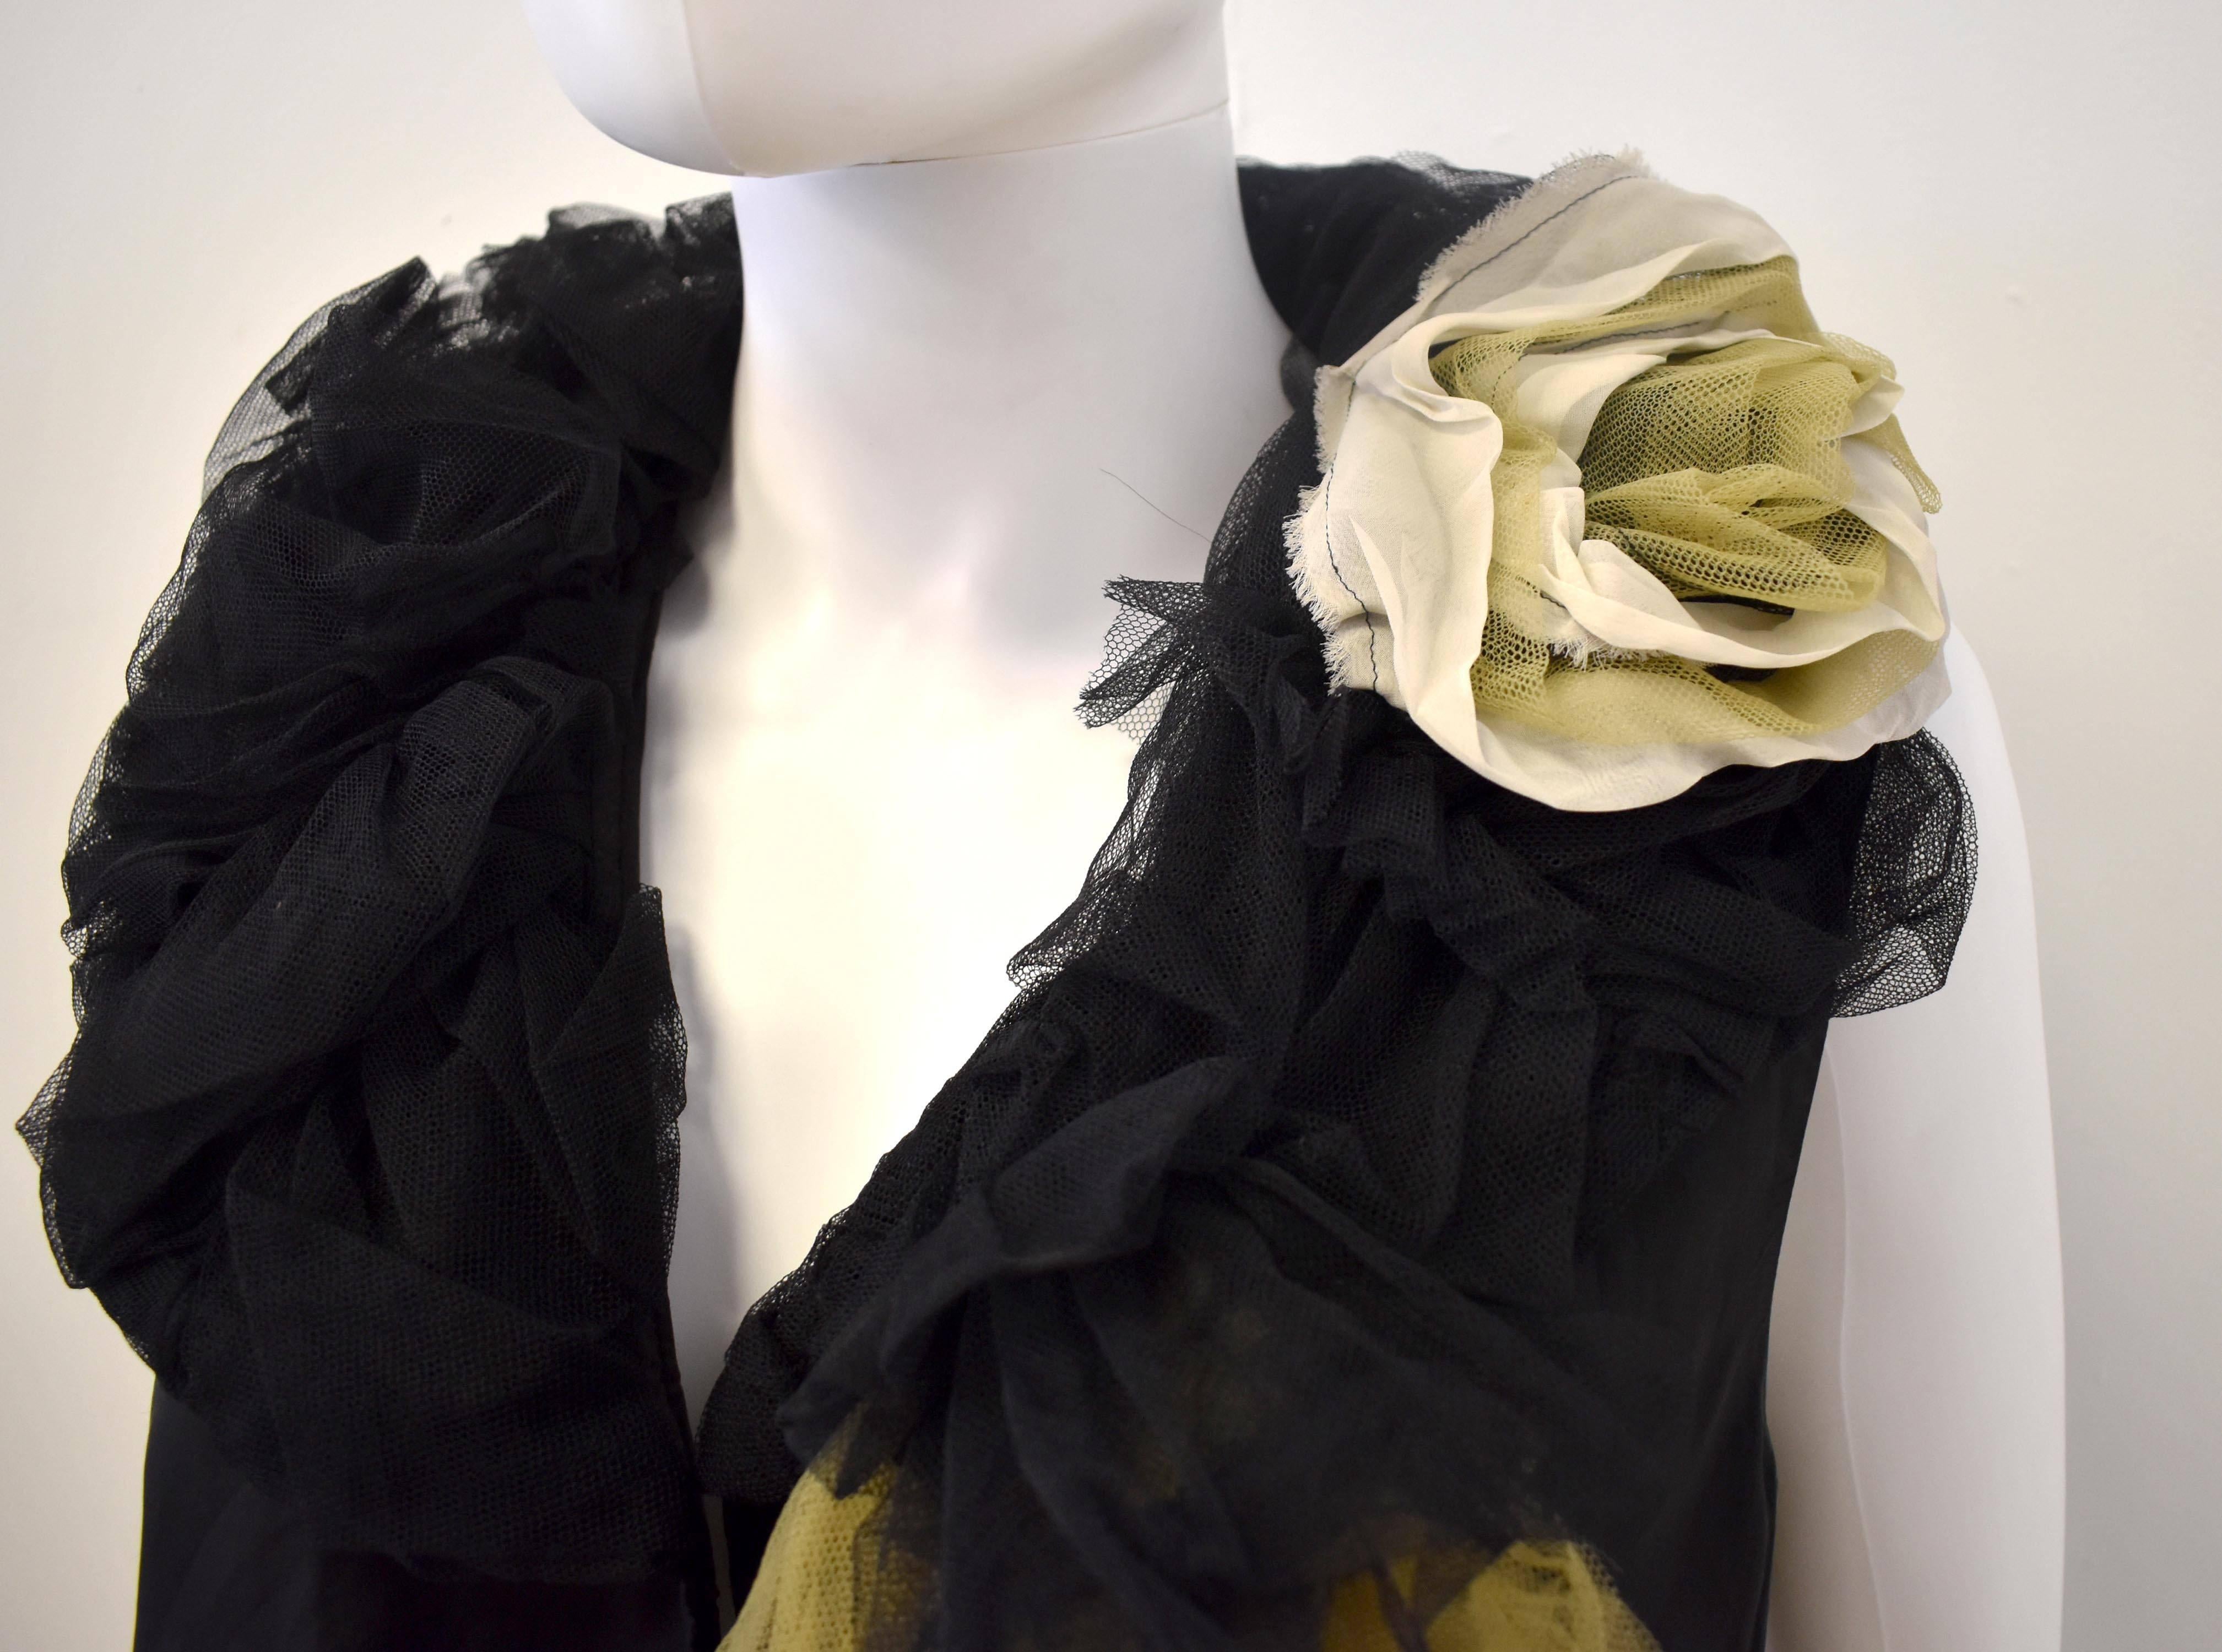 A unique black silky vest with ruffled tulle collar detail from the Robe de Chambre line of Comme des Garcons. The collar uses a mix of black, green  and beige tulle to create decorative and textured roses. The vest is a unique piece that can be